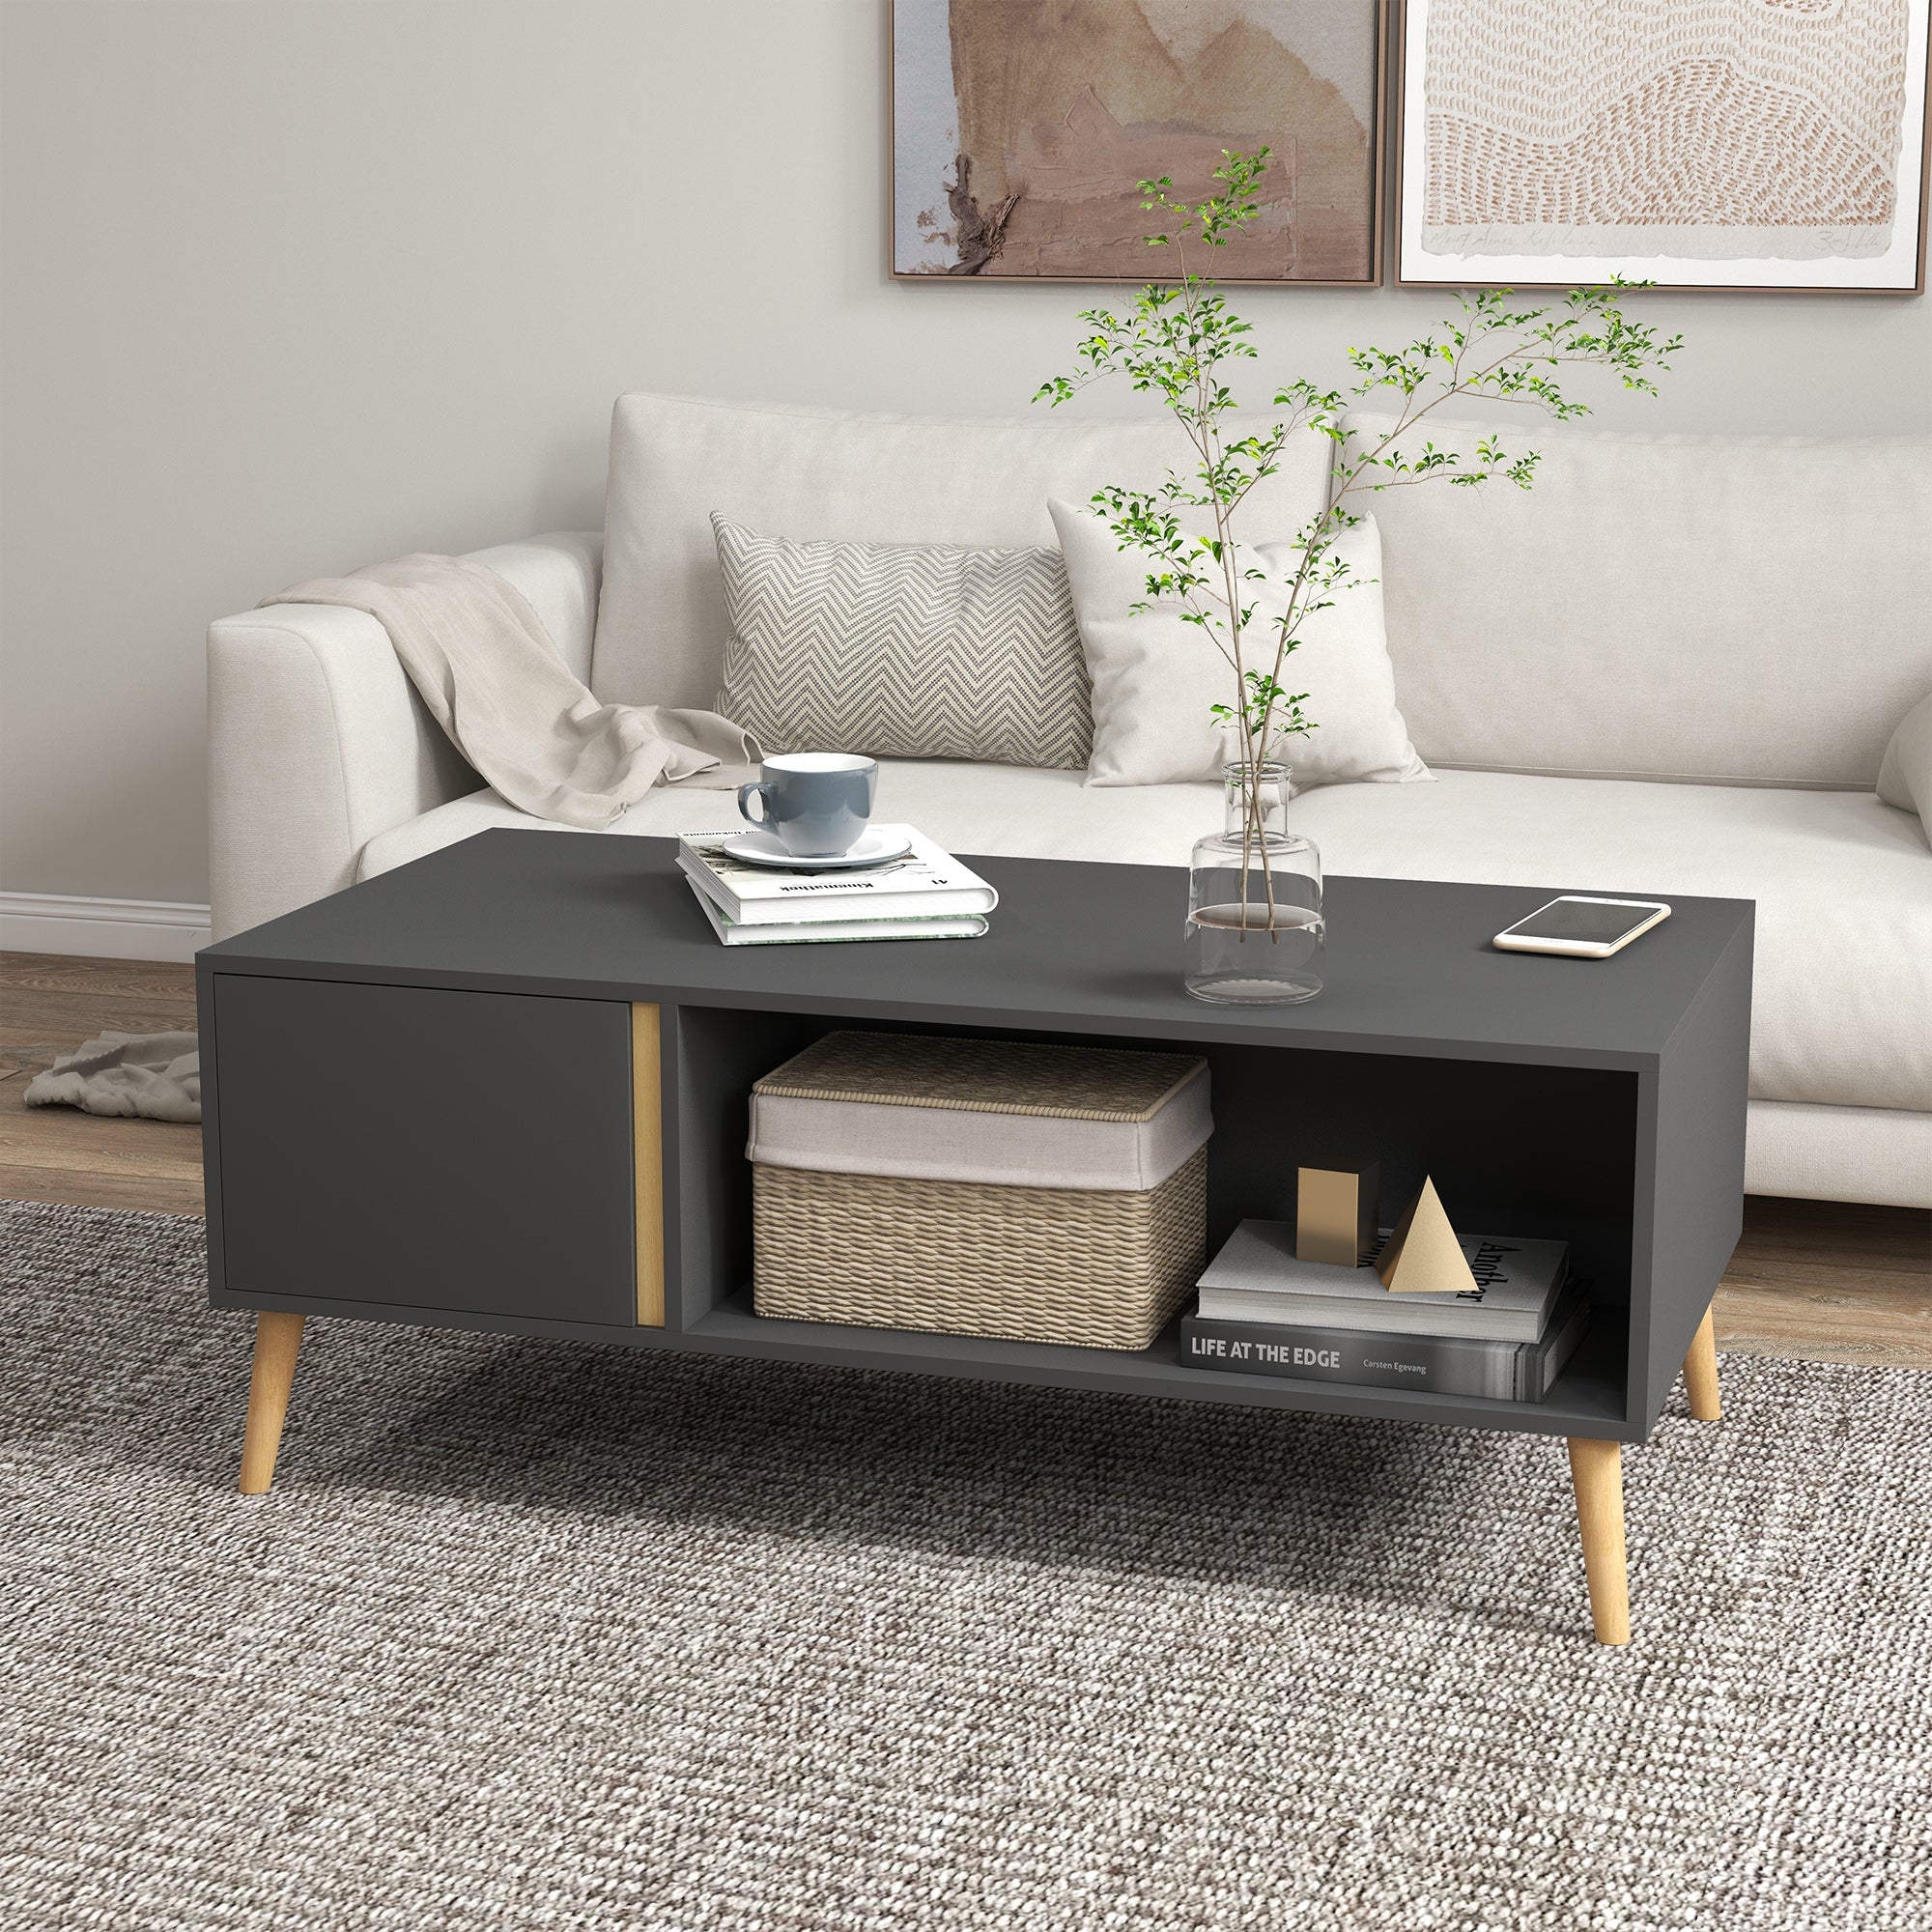 Coffee Table for Living Room, Modern Centre Table with Storage Compartments and Cabinets, Rectangular Side Table, 115x 58x 45cm, Grey-1